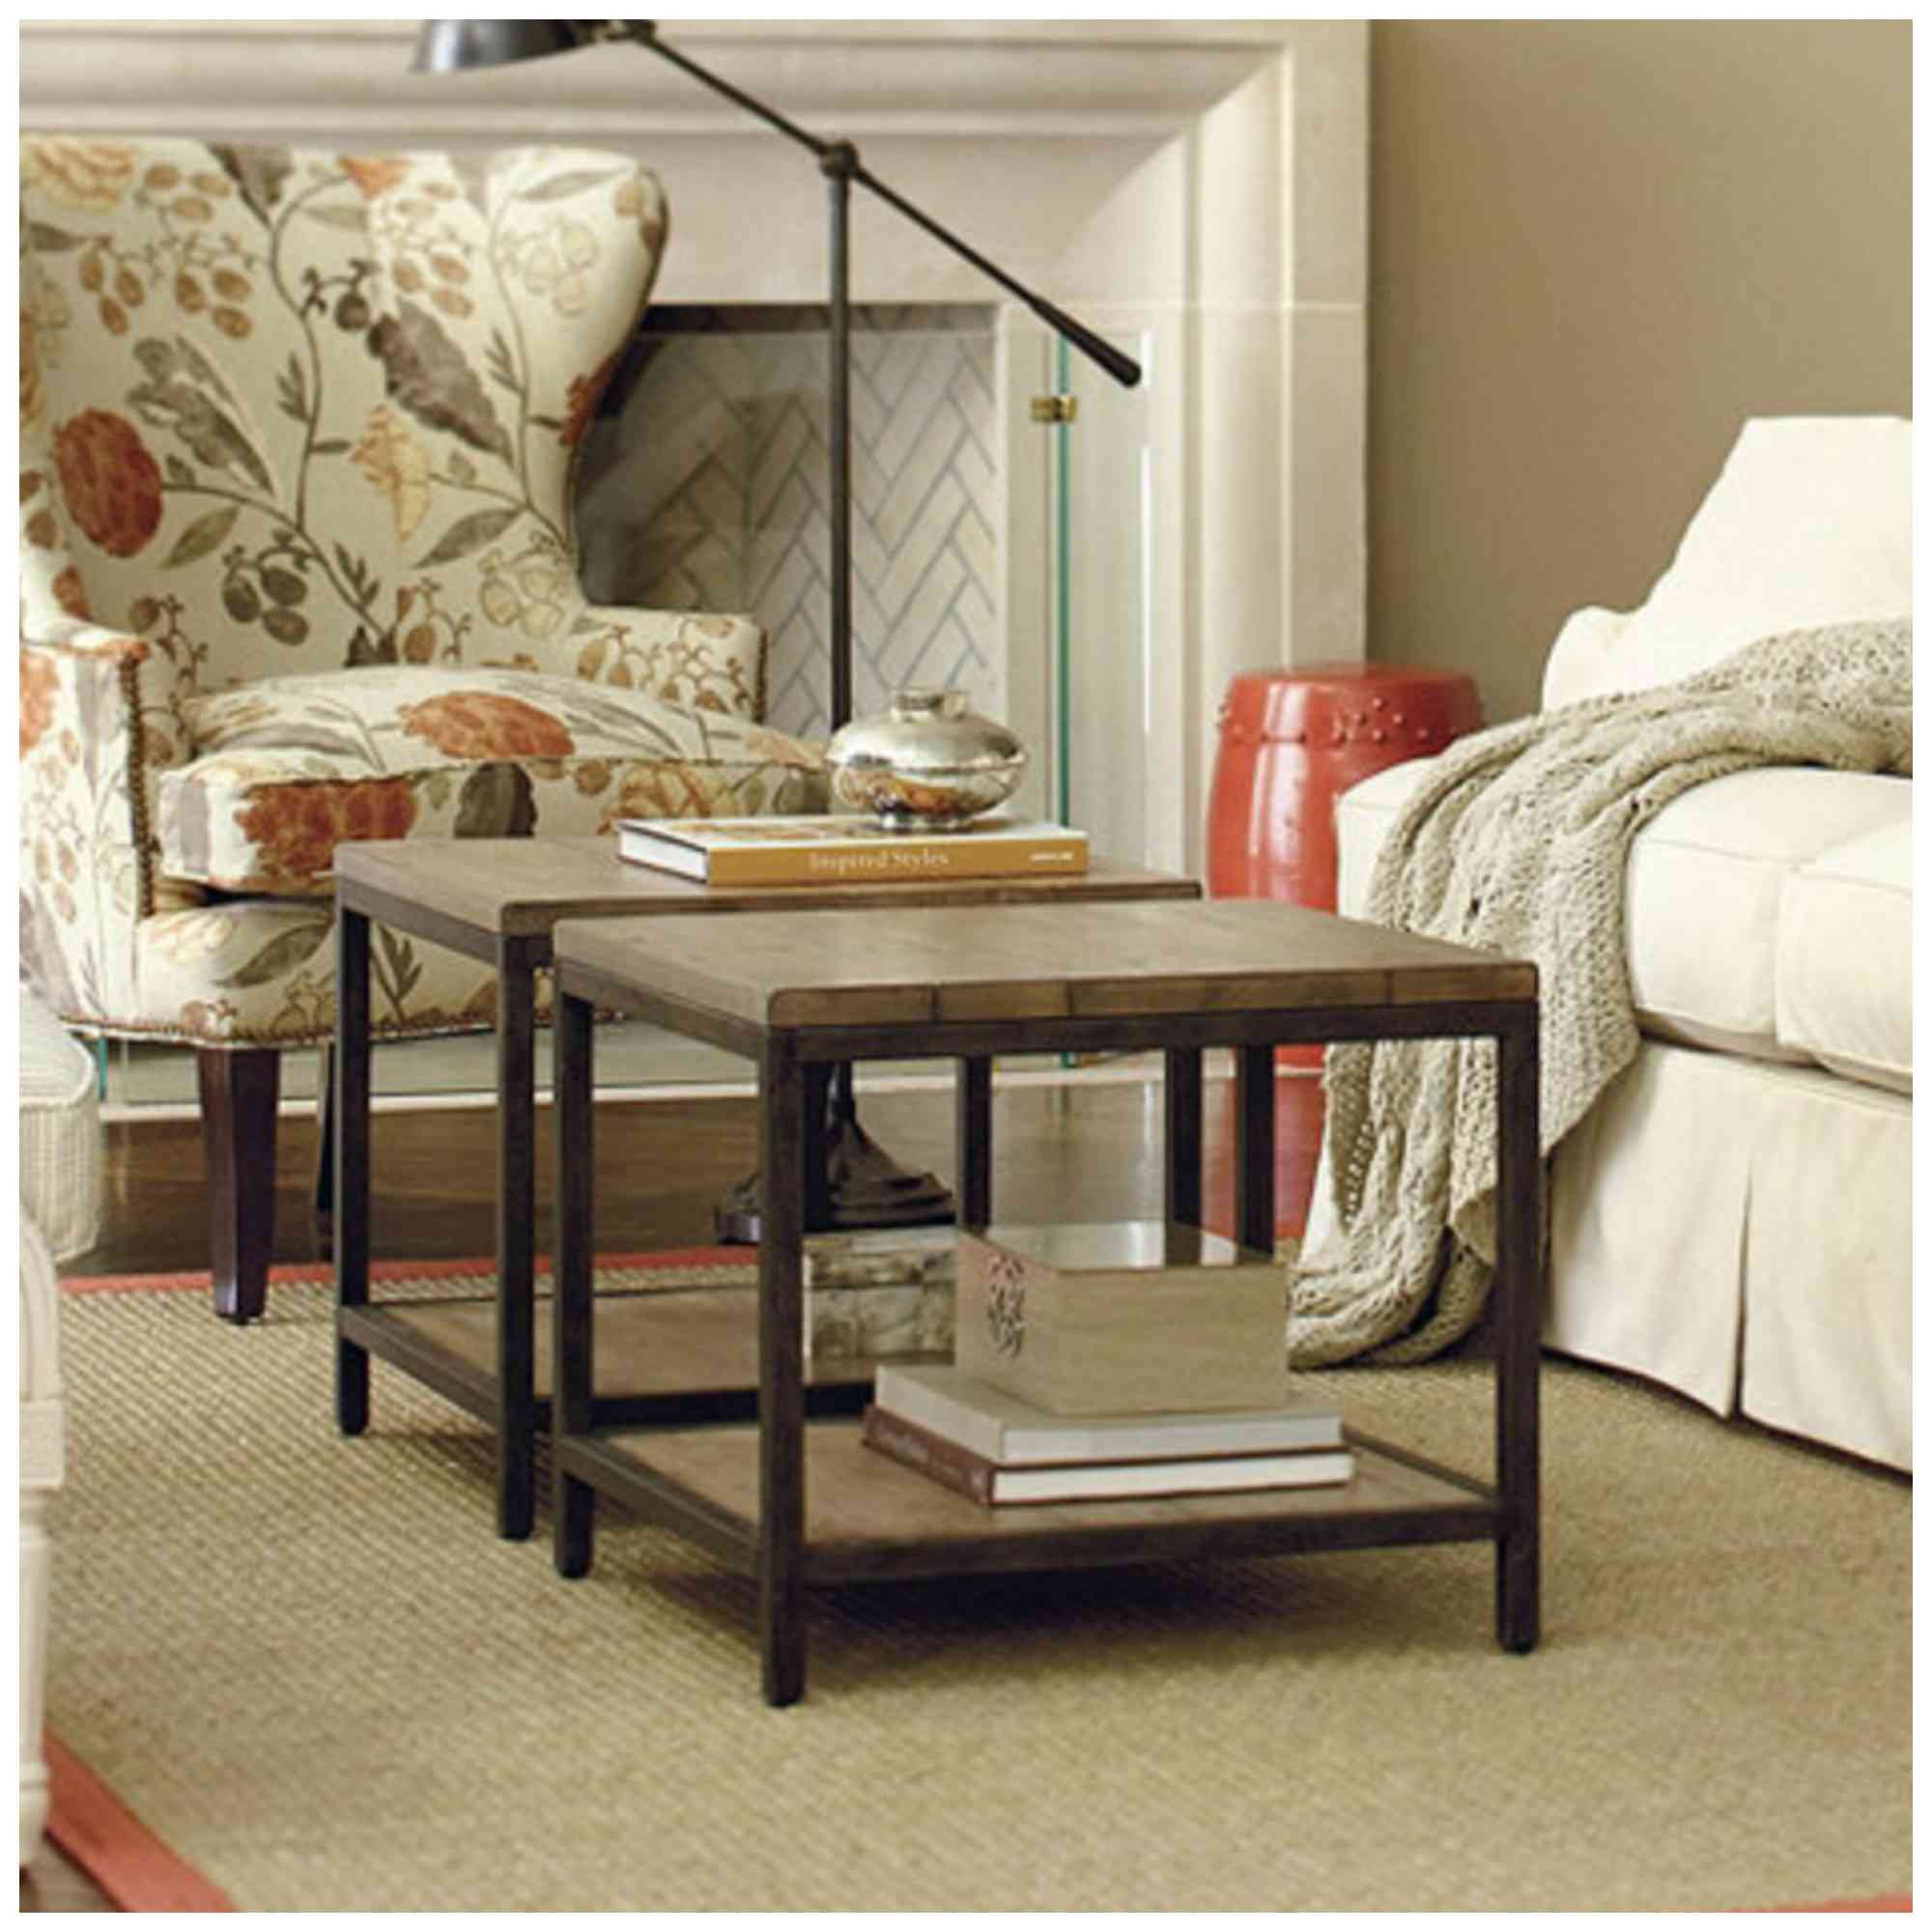 7 Coffee Table Alternatives For Small Living Rooms with dimensions 2000 X 2000